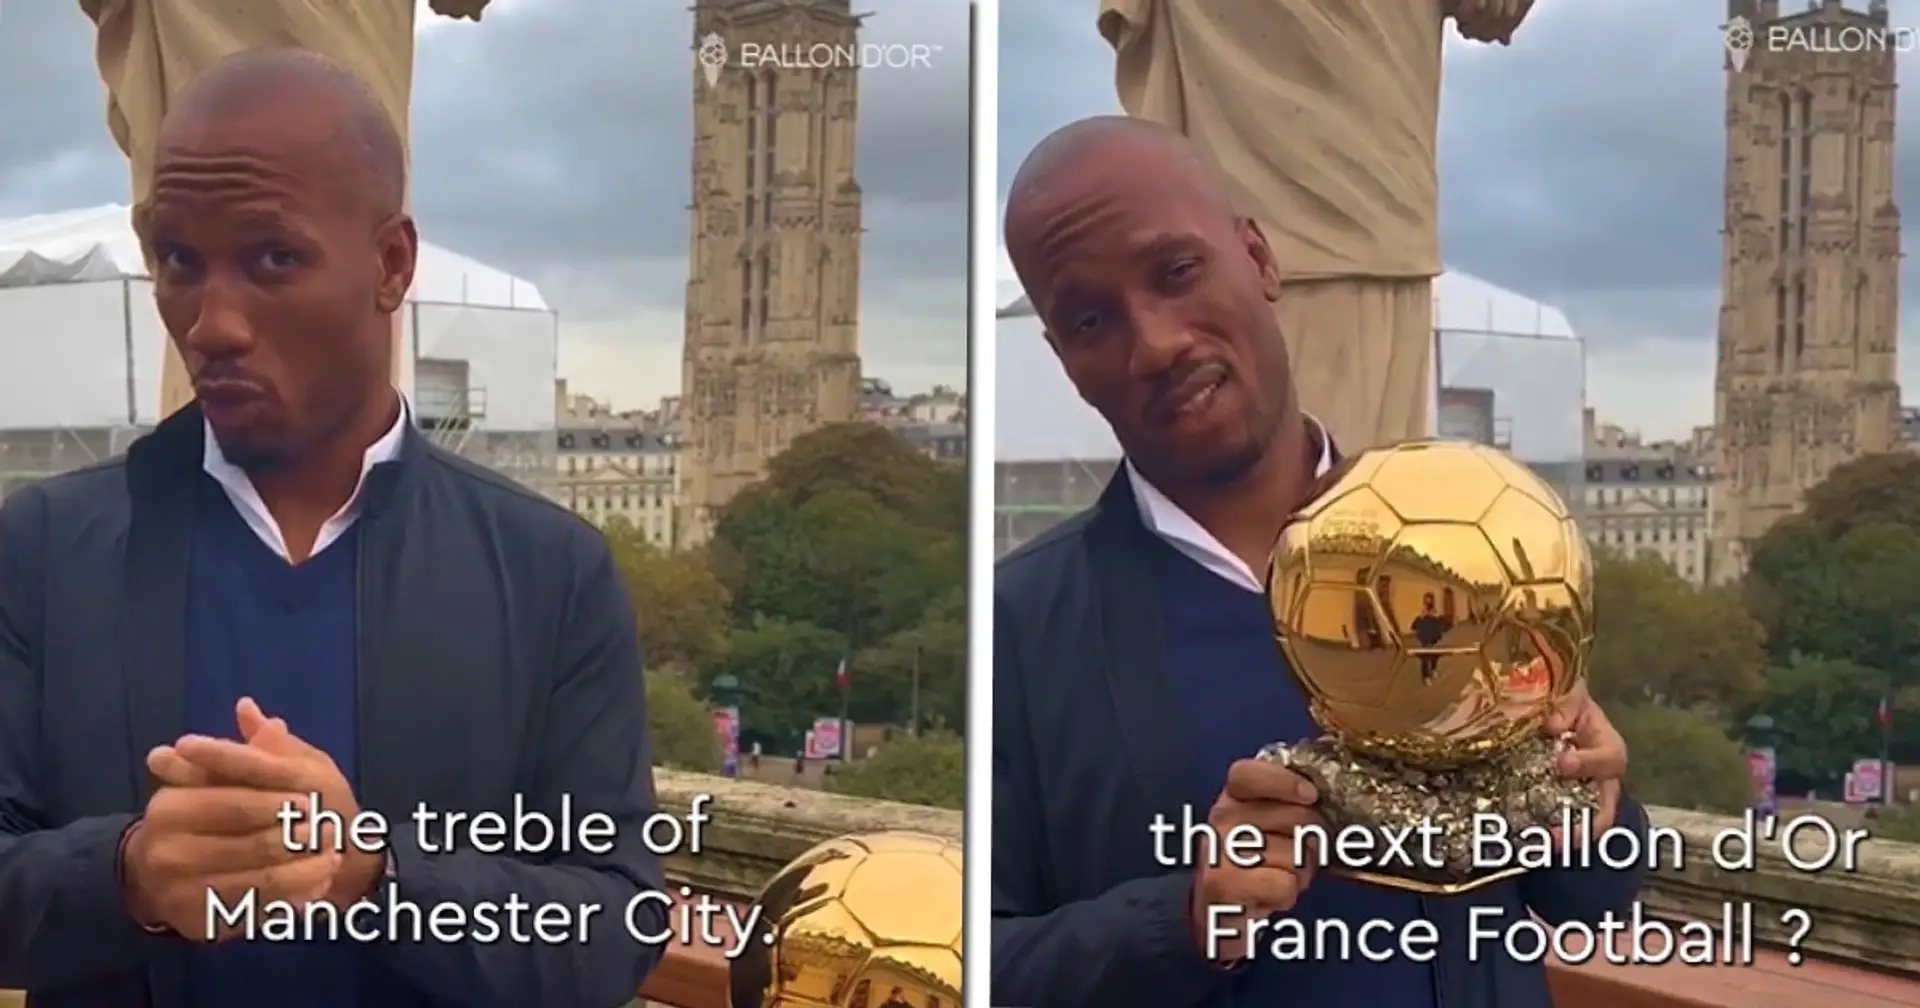 Didier Drogba hints at Ballon d'Or winner as he lands in Paris for gala